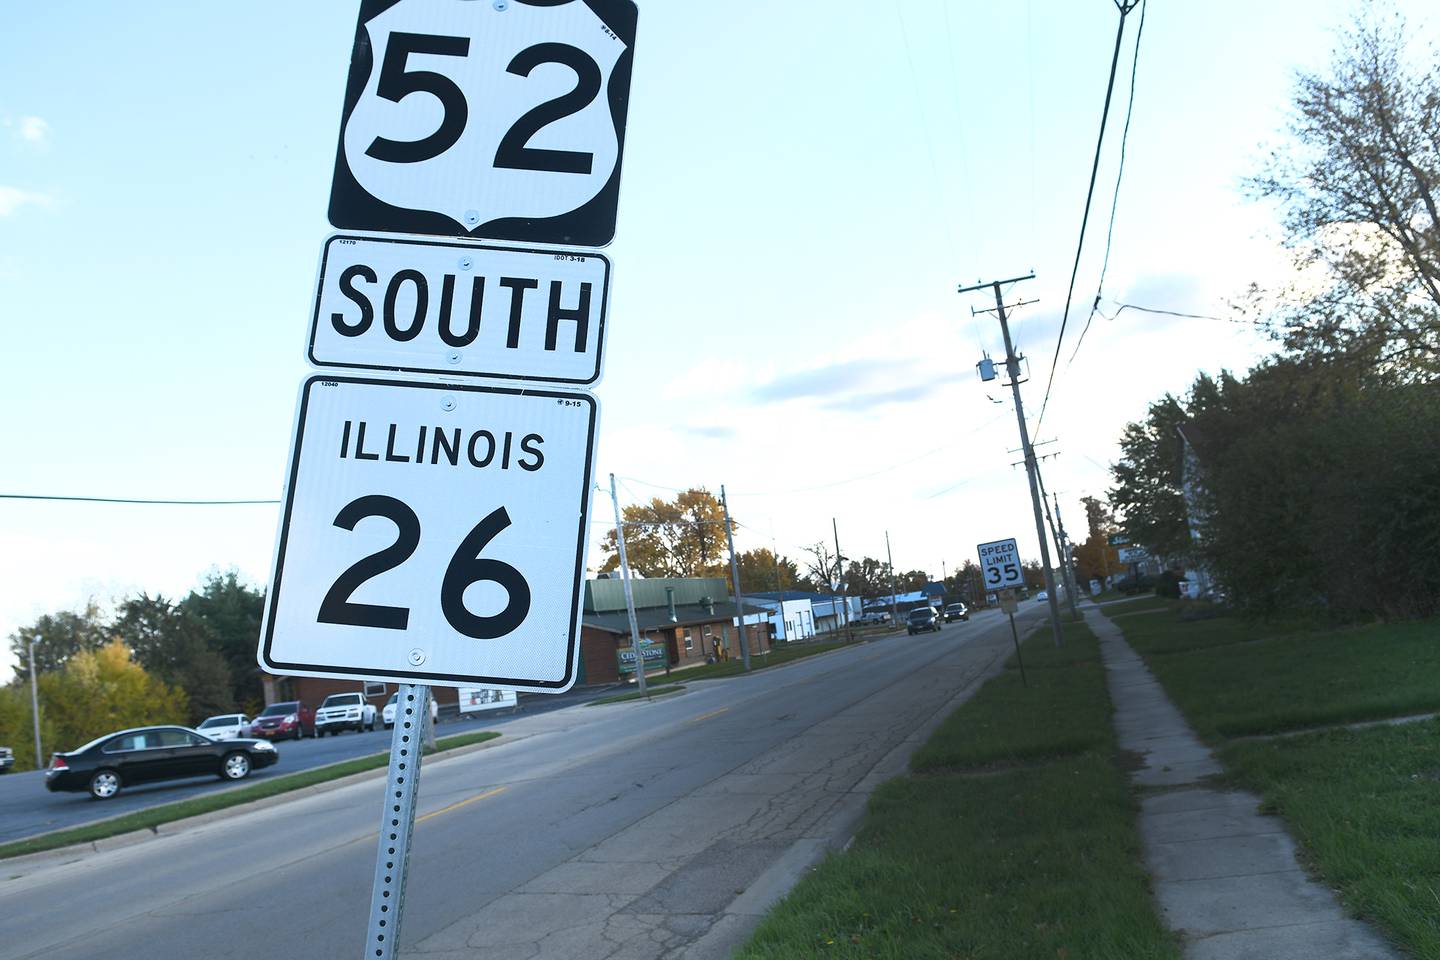 A ban on parking along Division Avenue (Illinois Route 26) within Polo's city limits goes into effect on Jan. 1.